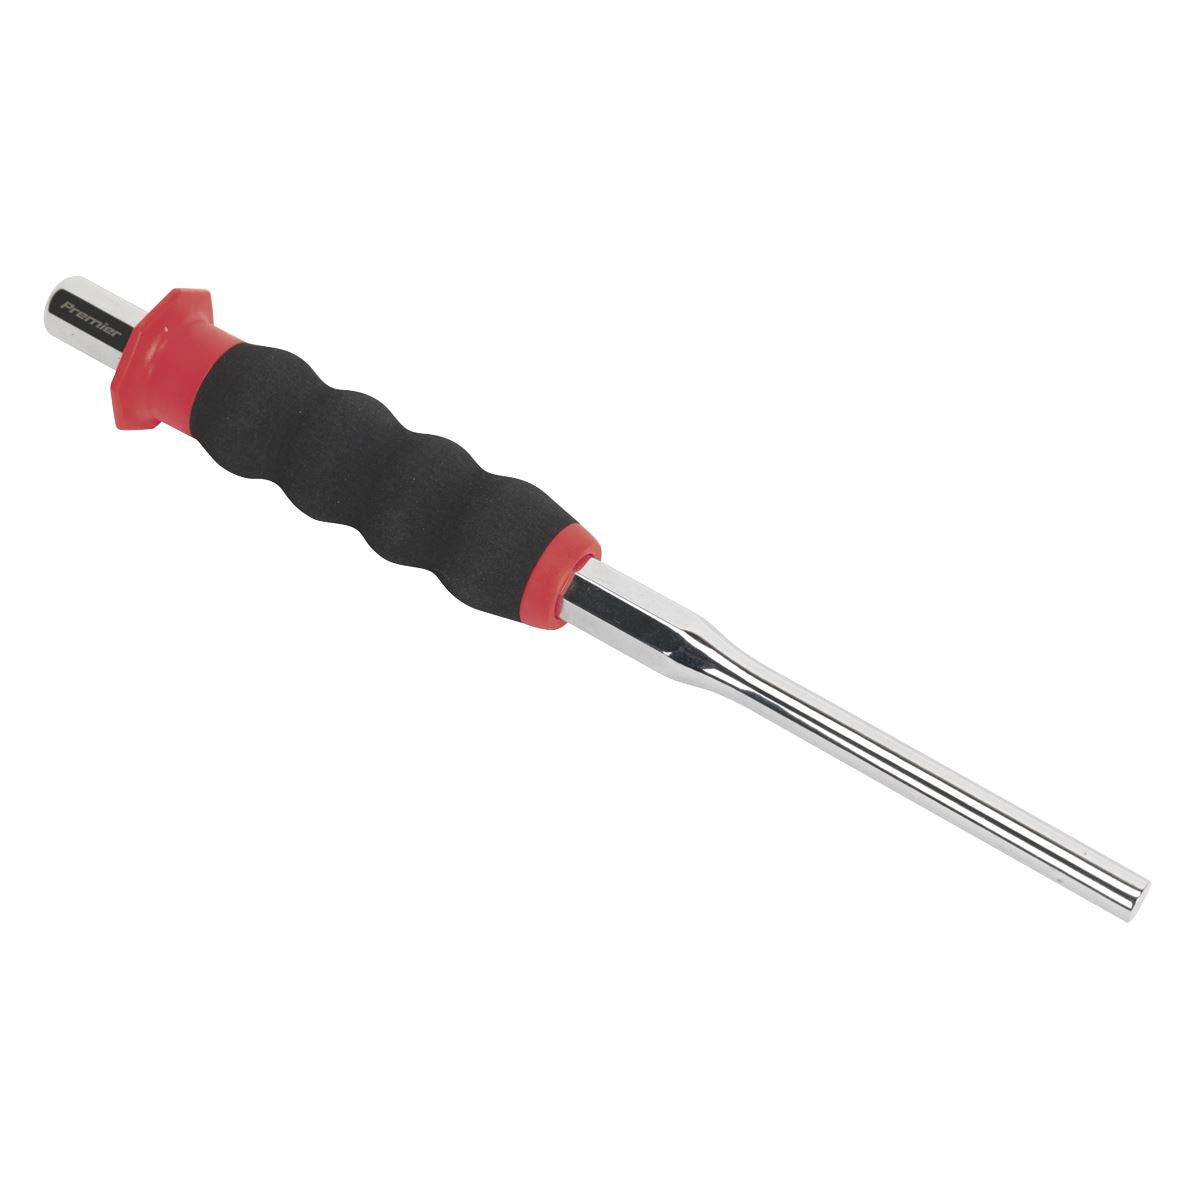 Sealey Premier Sheathed Parallel Pin Punch Ø8mm